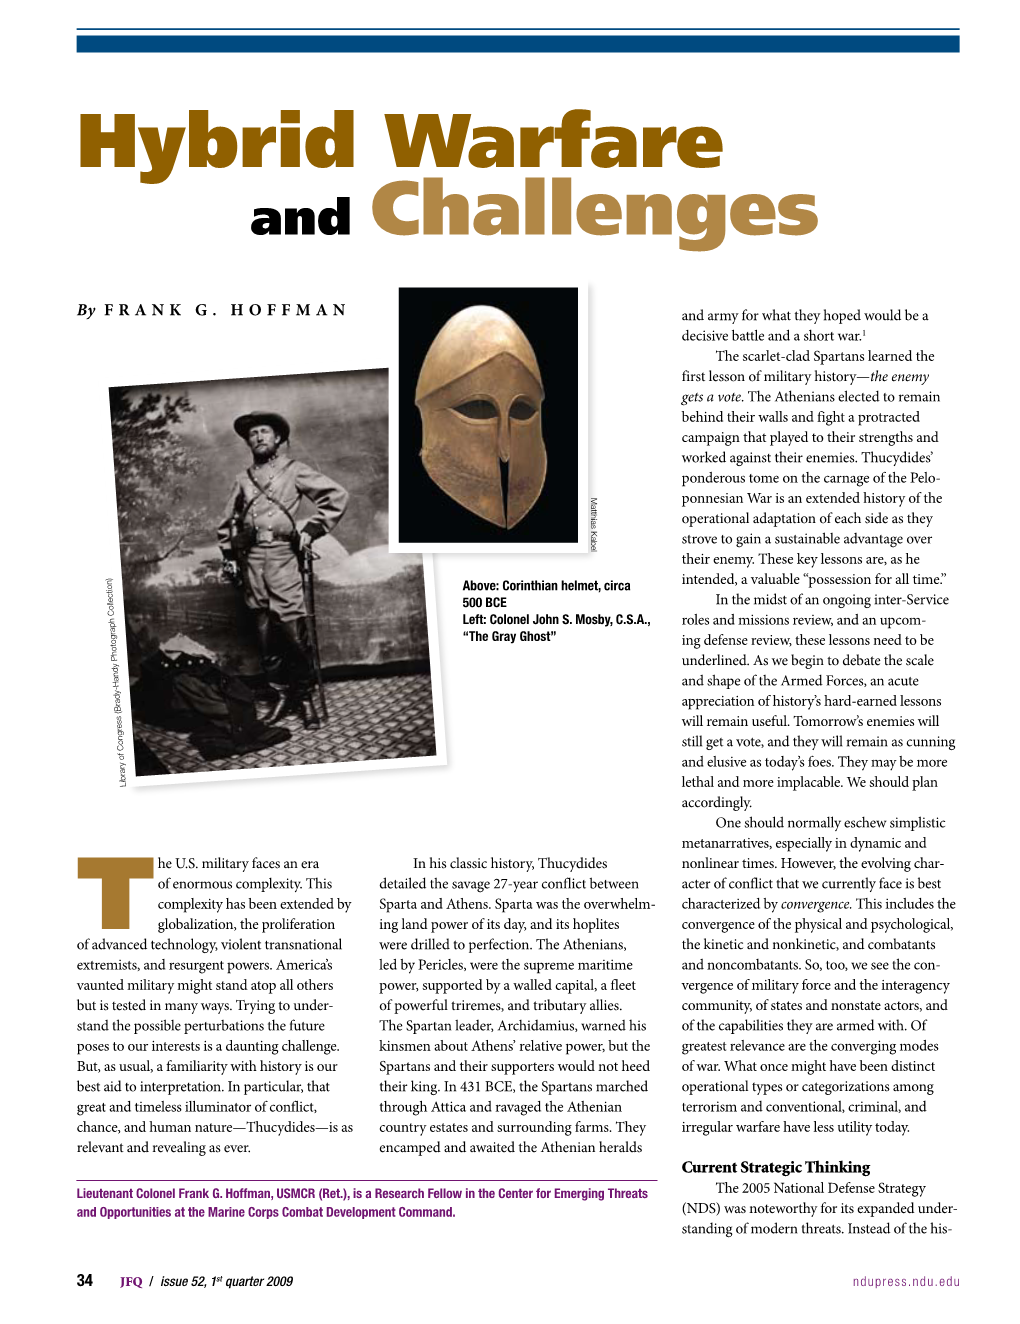 Hybrid Warfare and Challenges